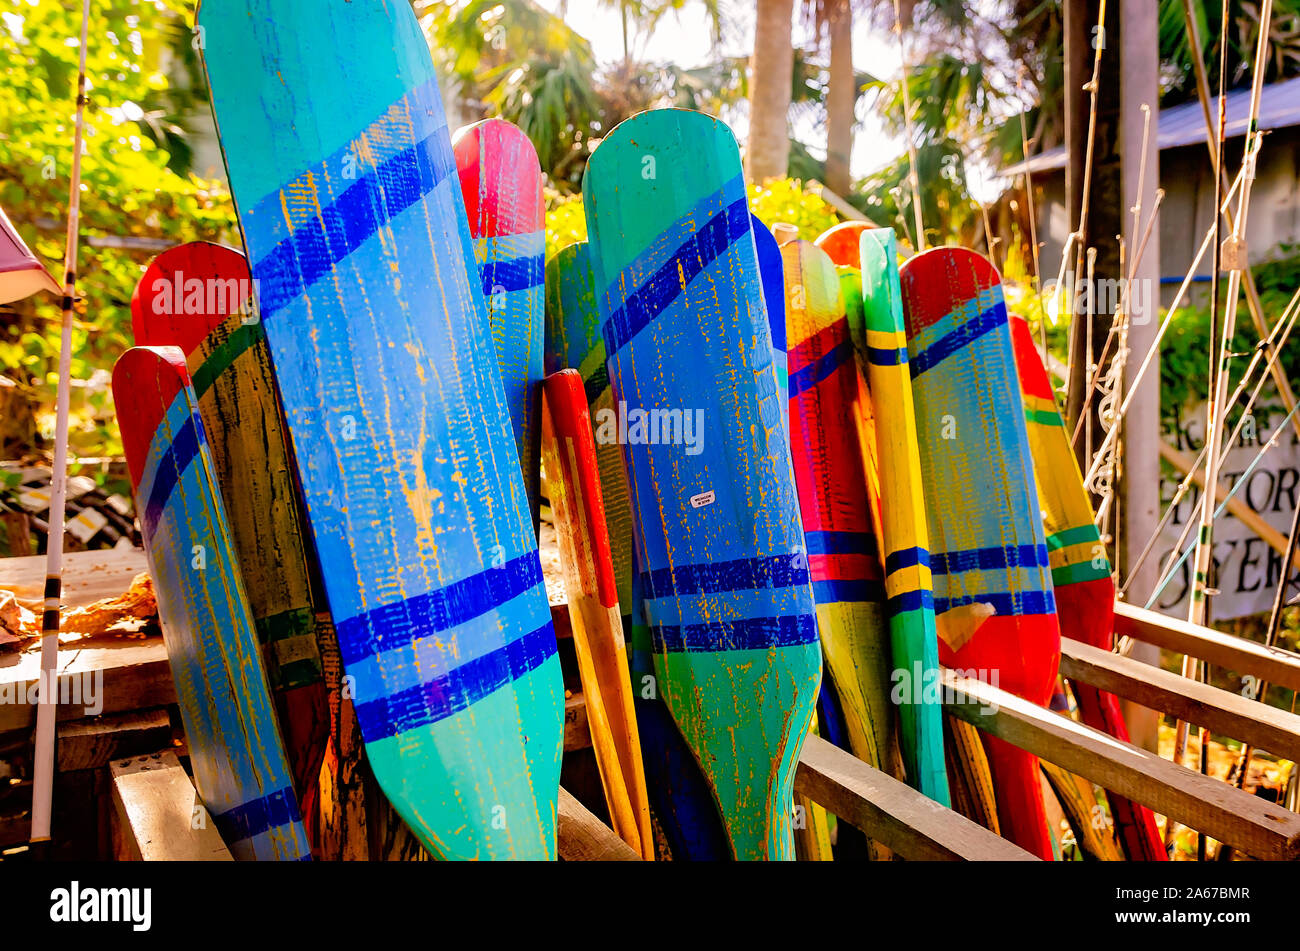 Wooden canoe paddles are displayed, Oct. 6, 2019, in Apalachicola, Florida. Stock Photo